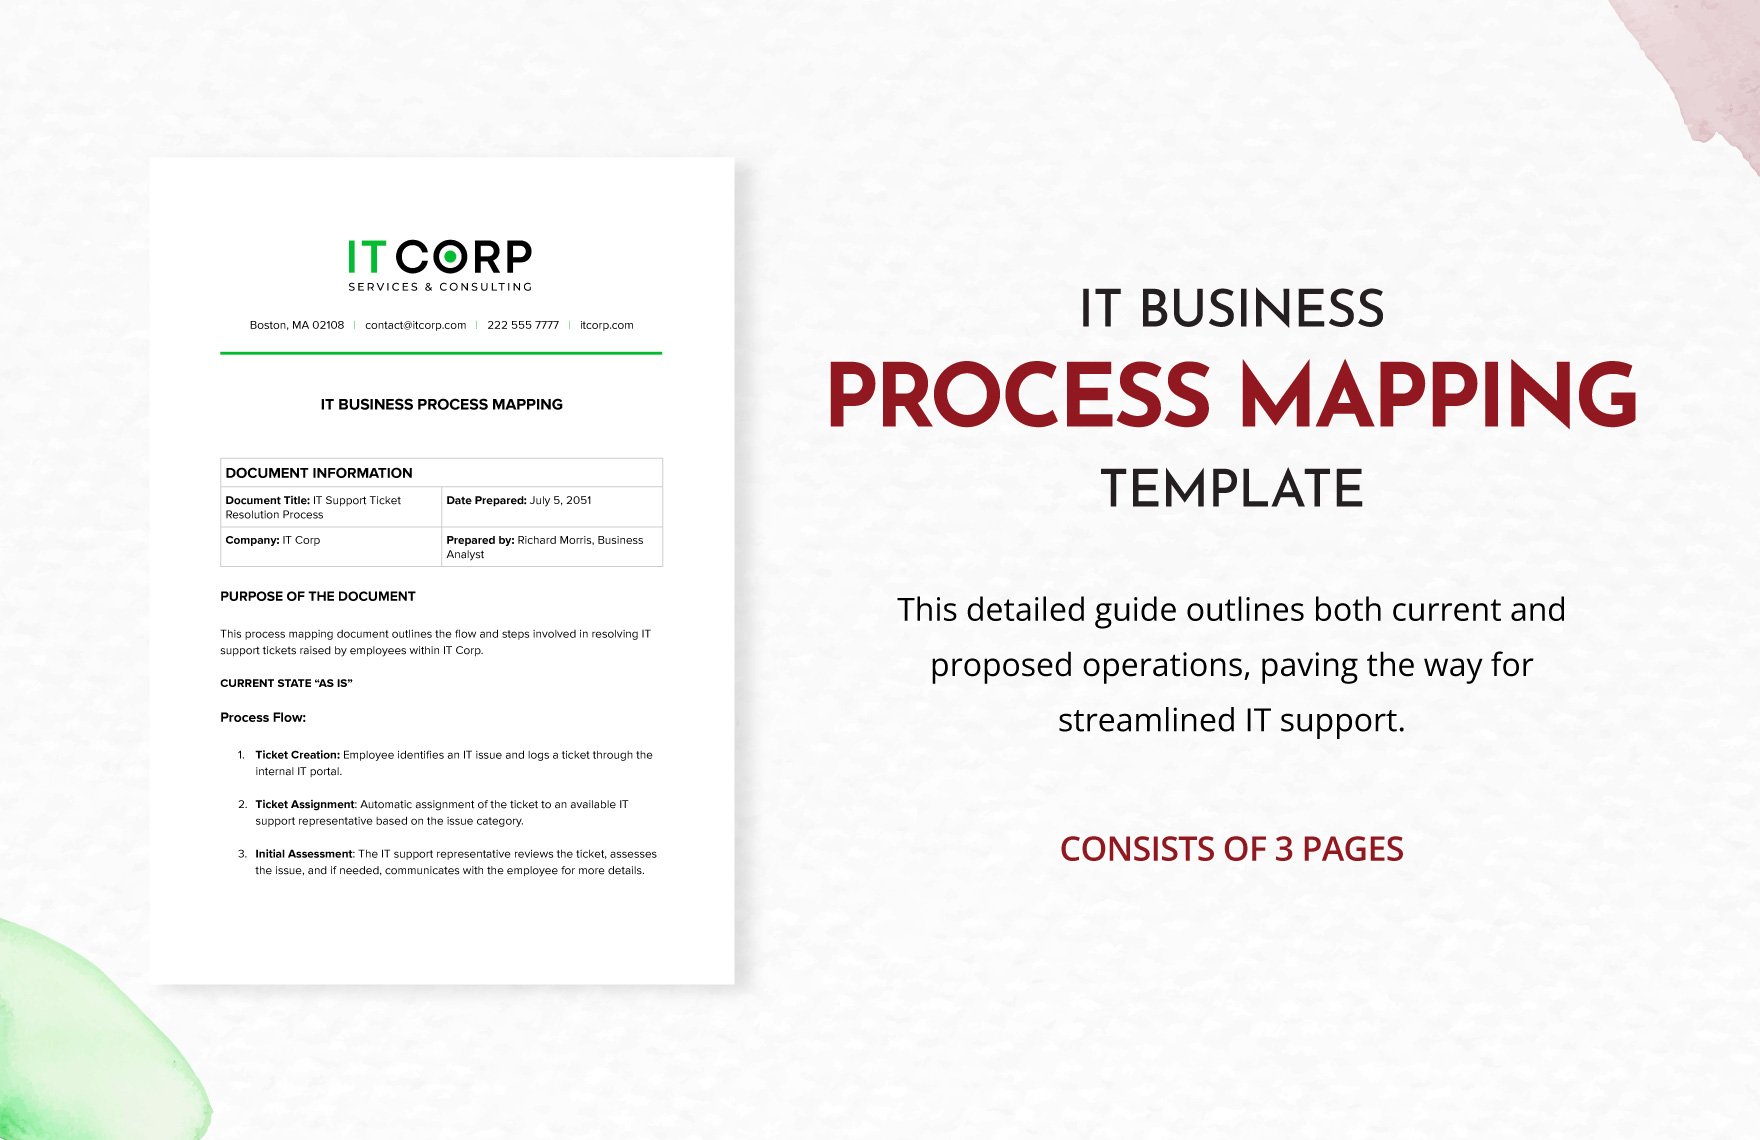 IT Business Process Mapping Template